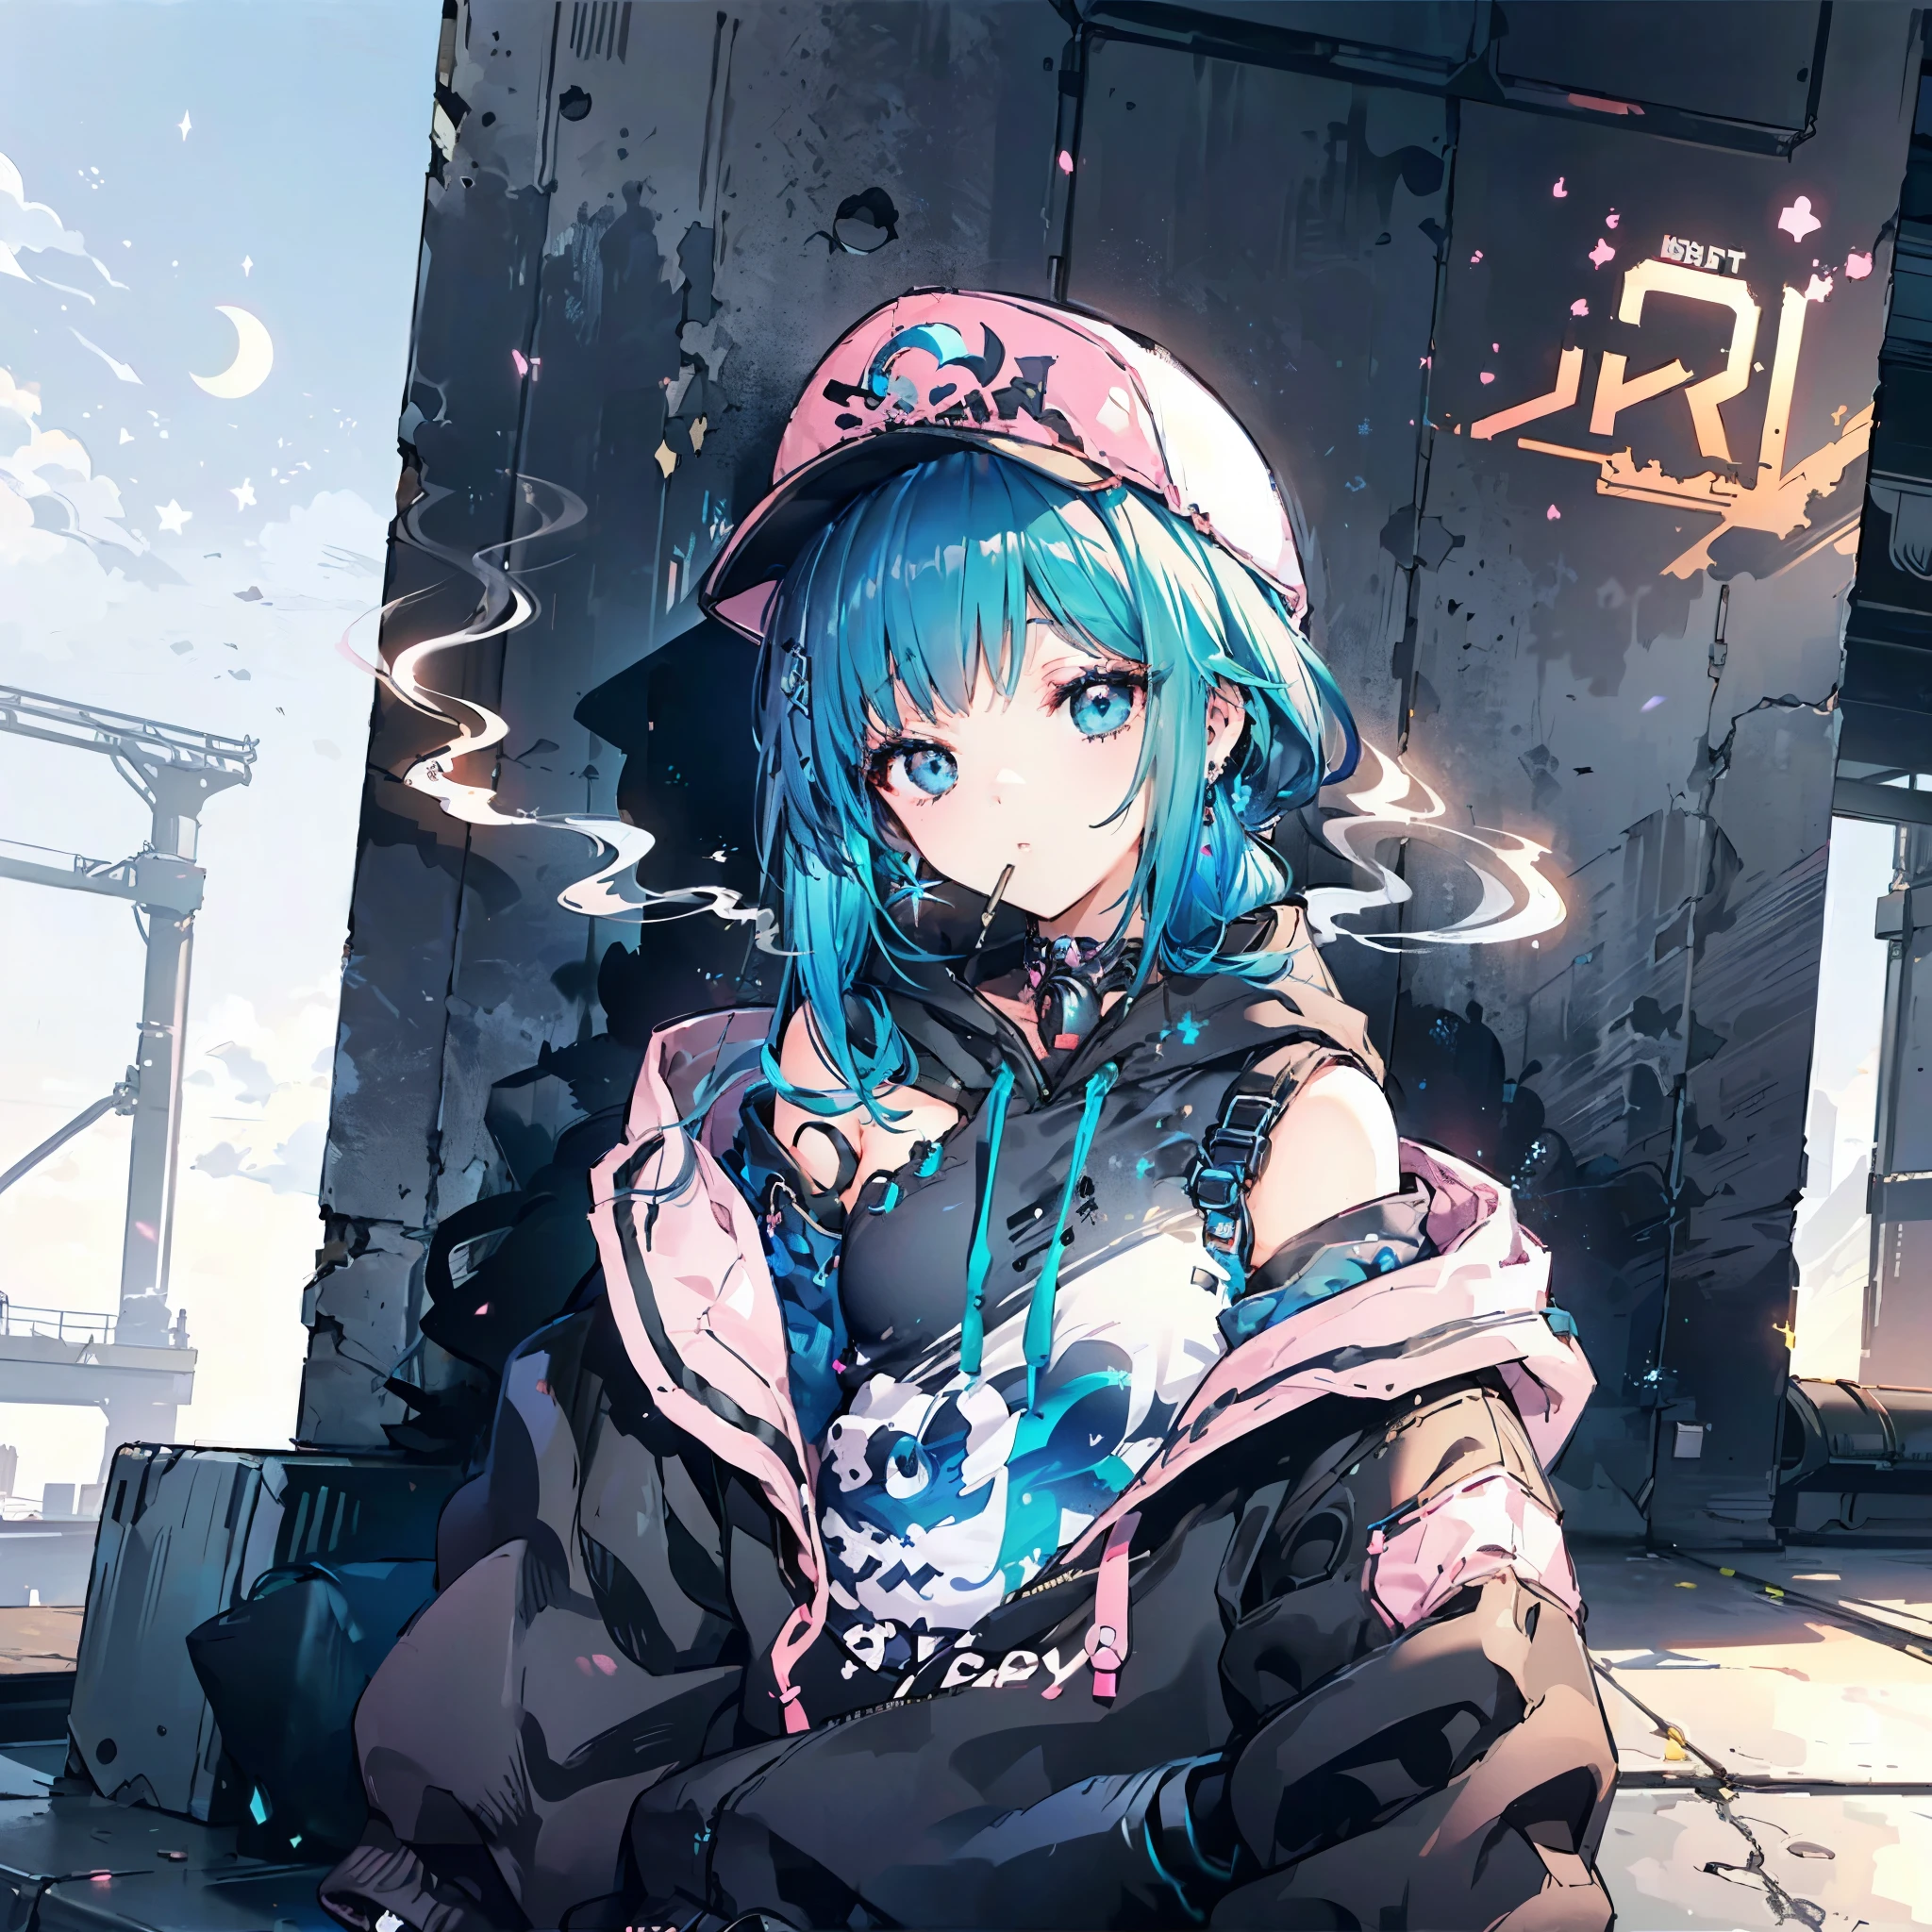 (((Neon color　pink and blue hair　ponytail　Wear a cap　Off-the-shoulder hoodie)))　((cyber punk　Earrings　Smoking alone　Empty beer cans　Rooftop　Night City))　(Shining Moon　Shining Background)